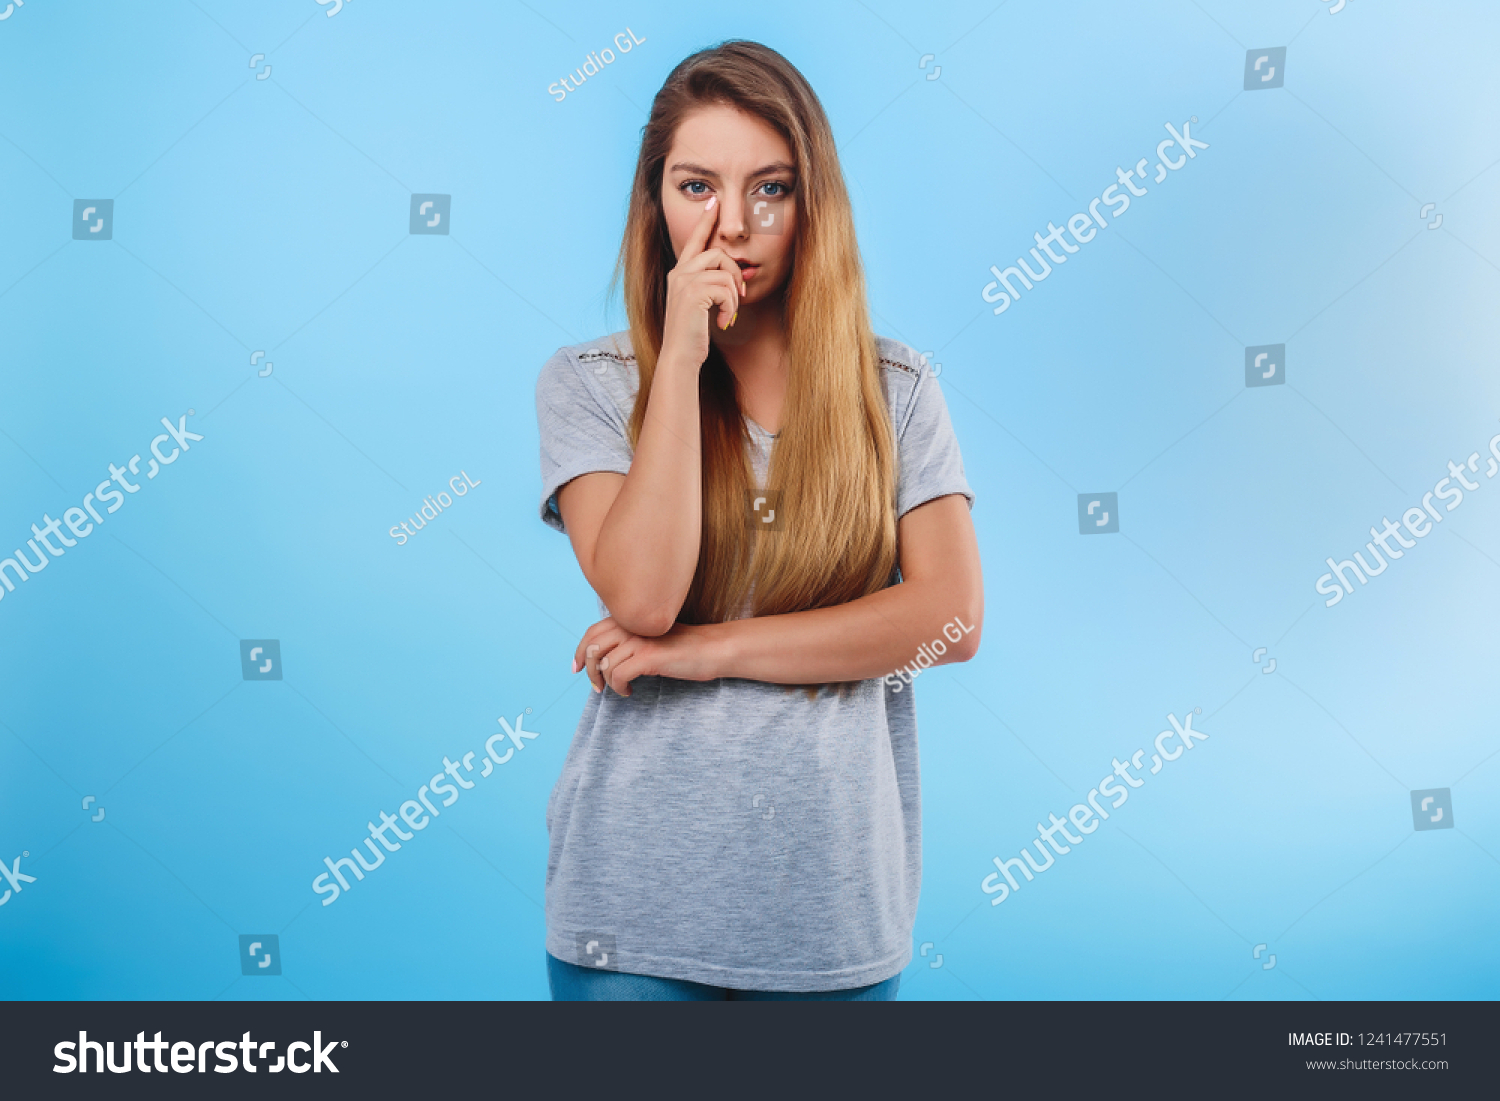 Distressed girl on blue background touches her nose intently. Concept disease, malaise, problems. #1241477551